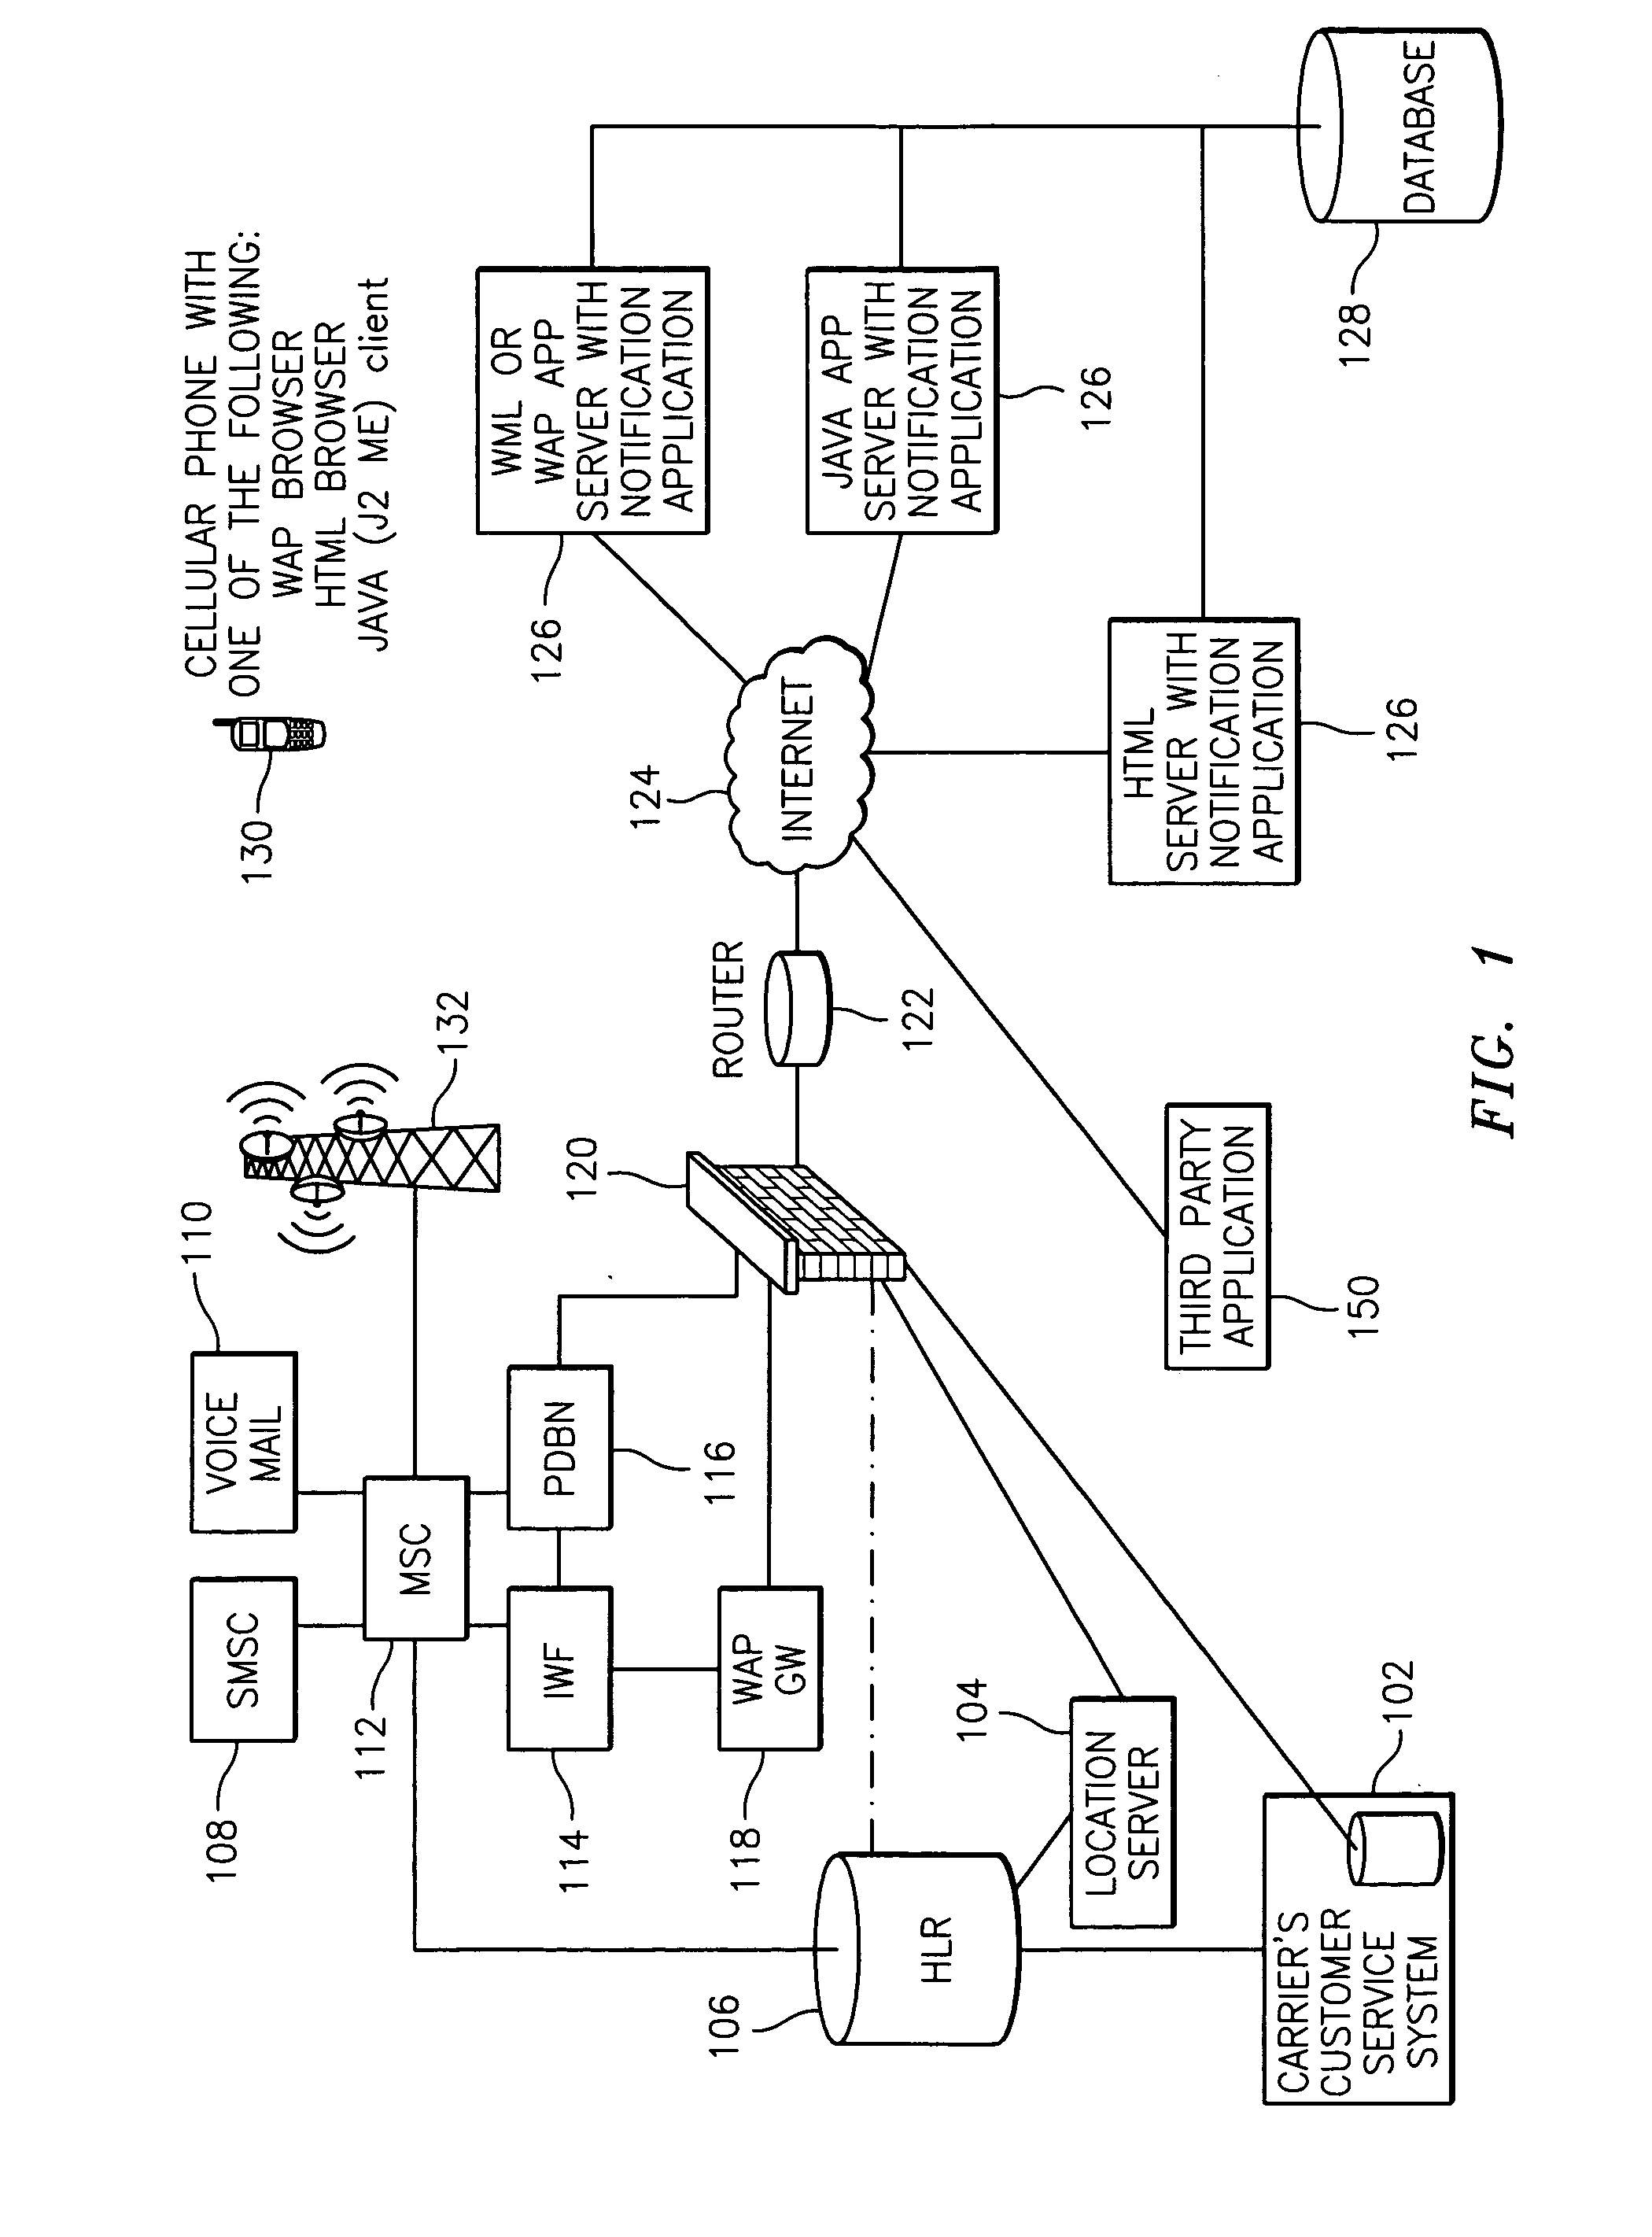 Methods, systems and computer products for remote monitoring and control of application usage on mobile devices